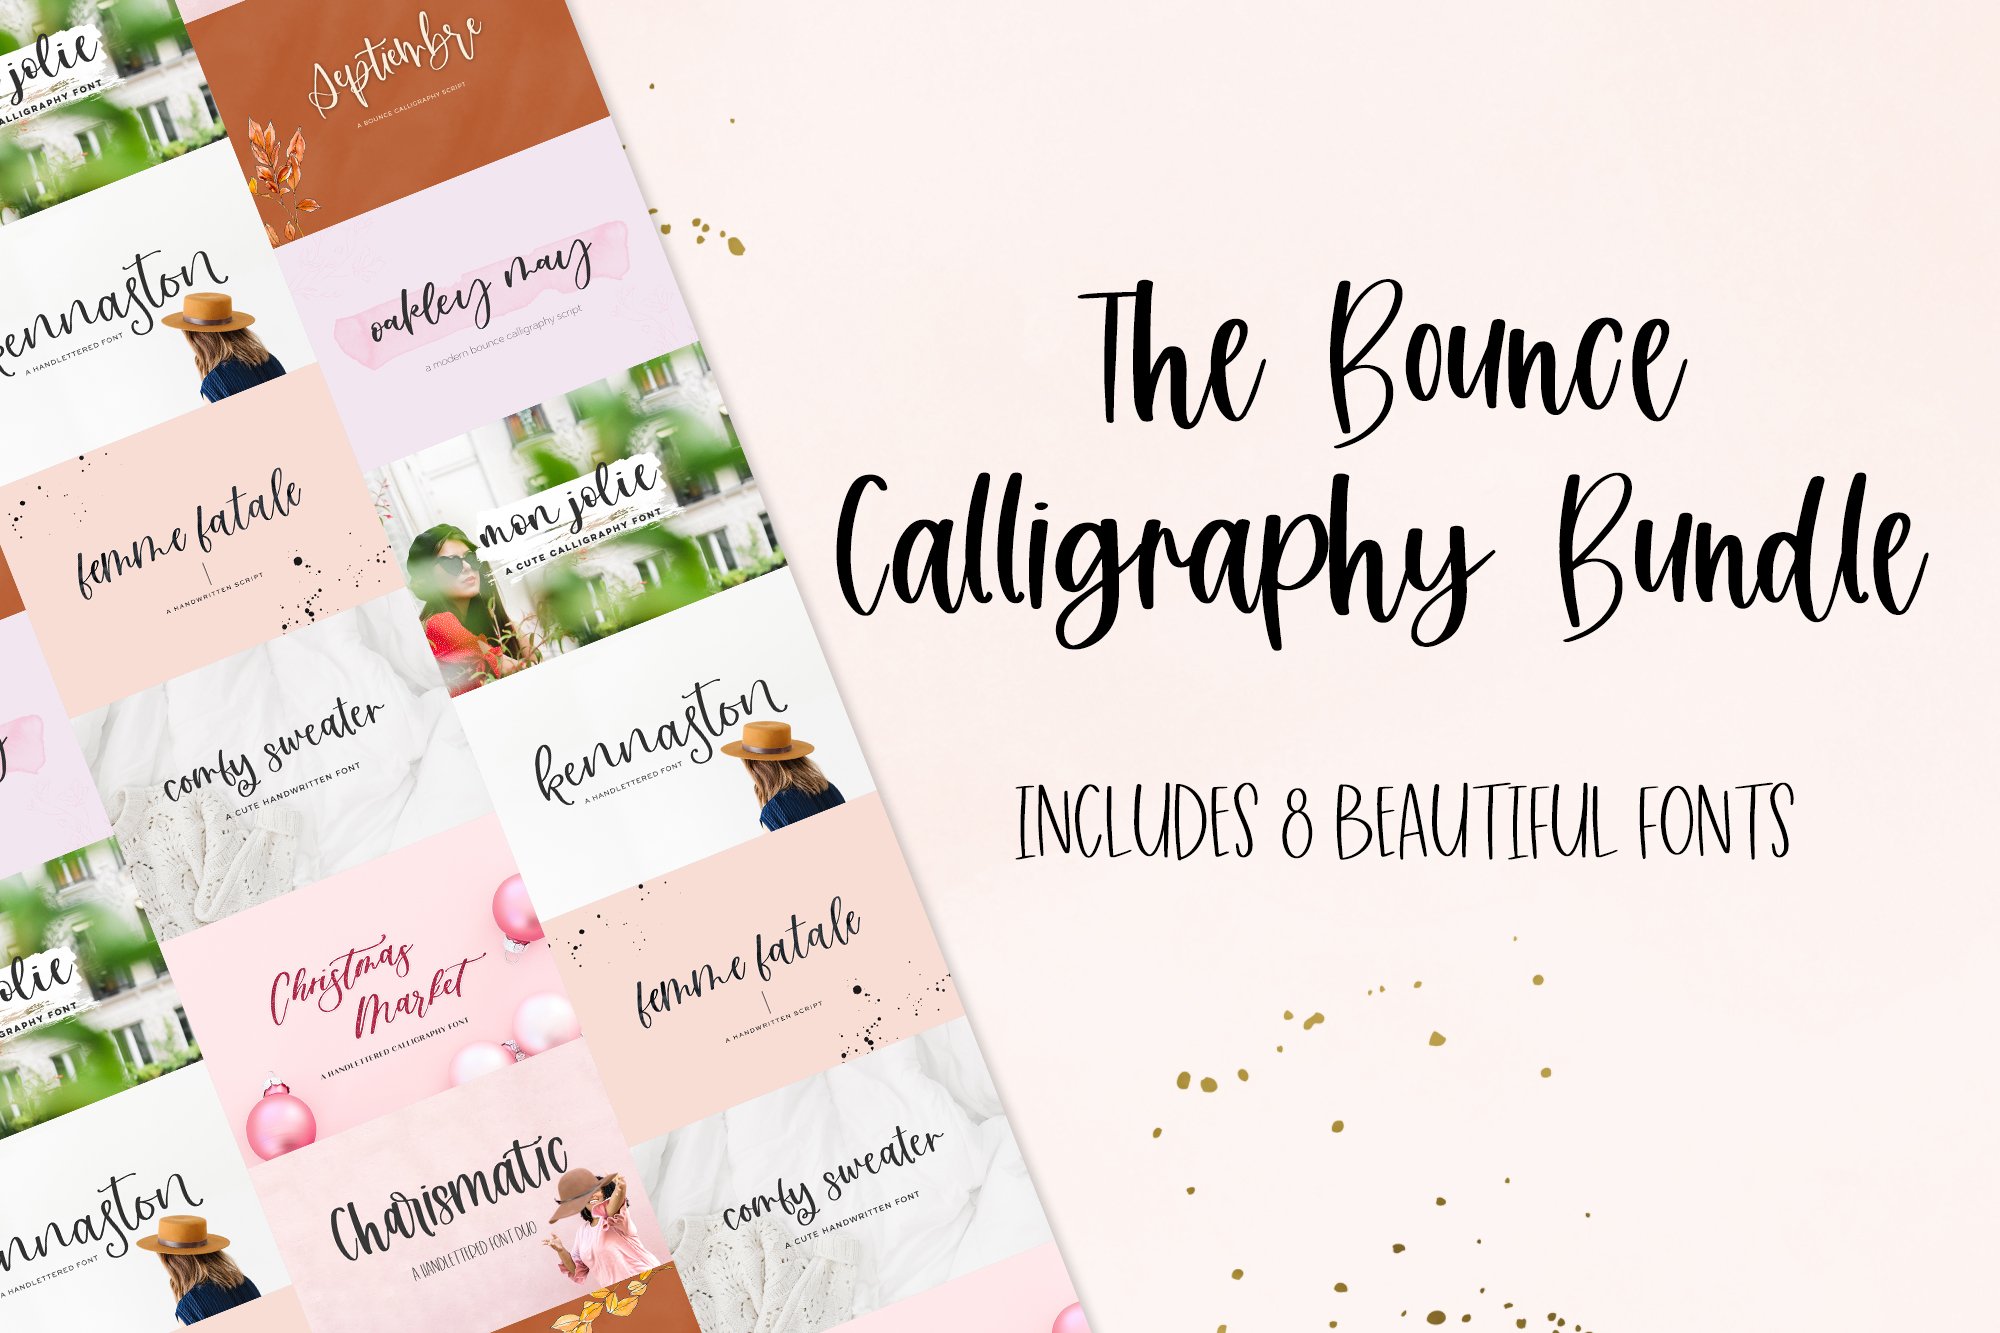 Bounce Calligraphy Font Bundle cover image.